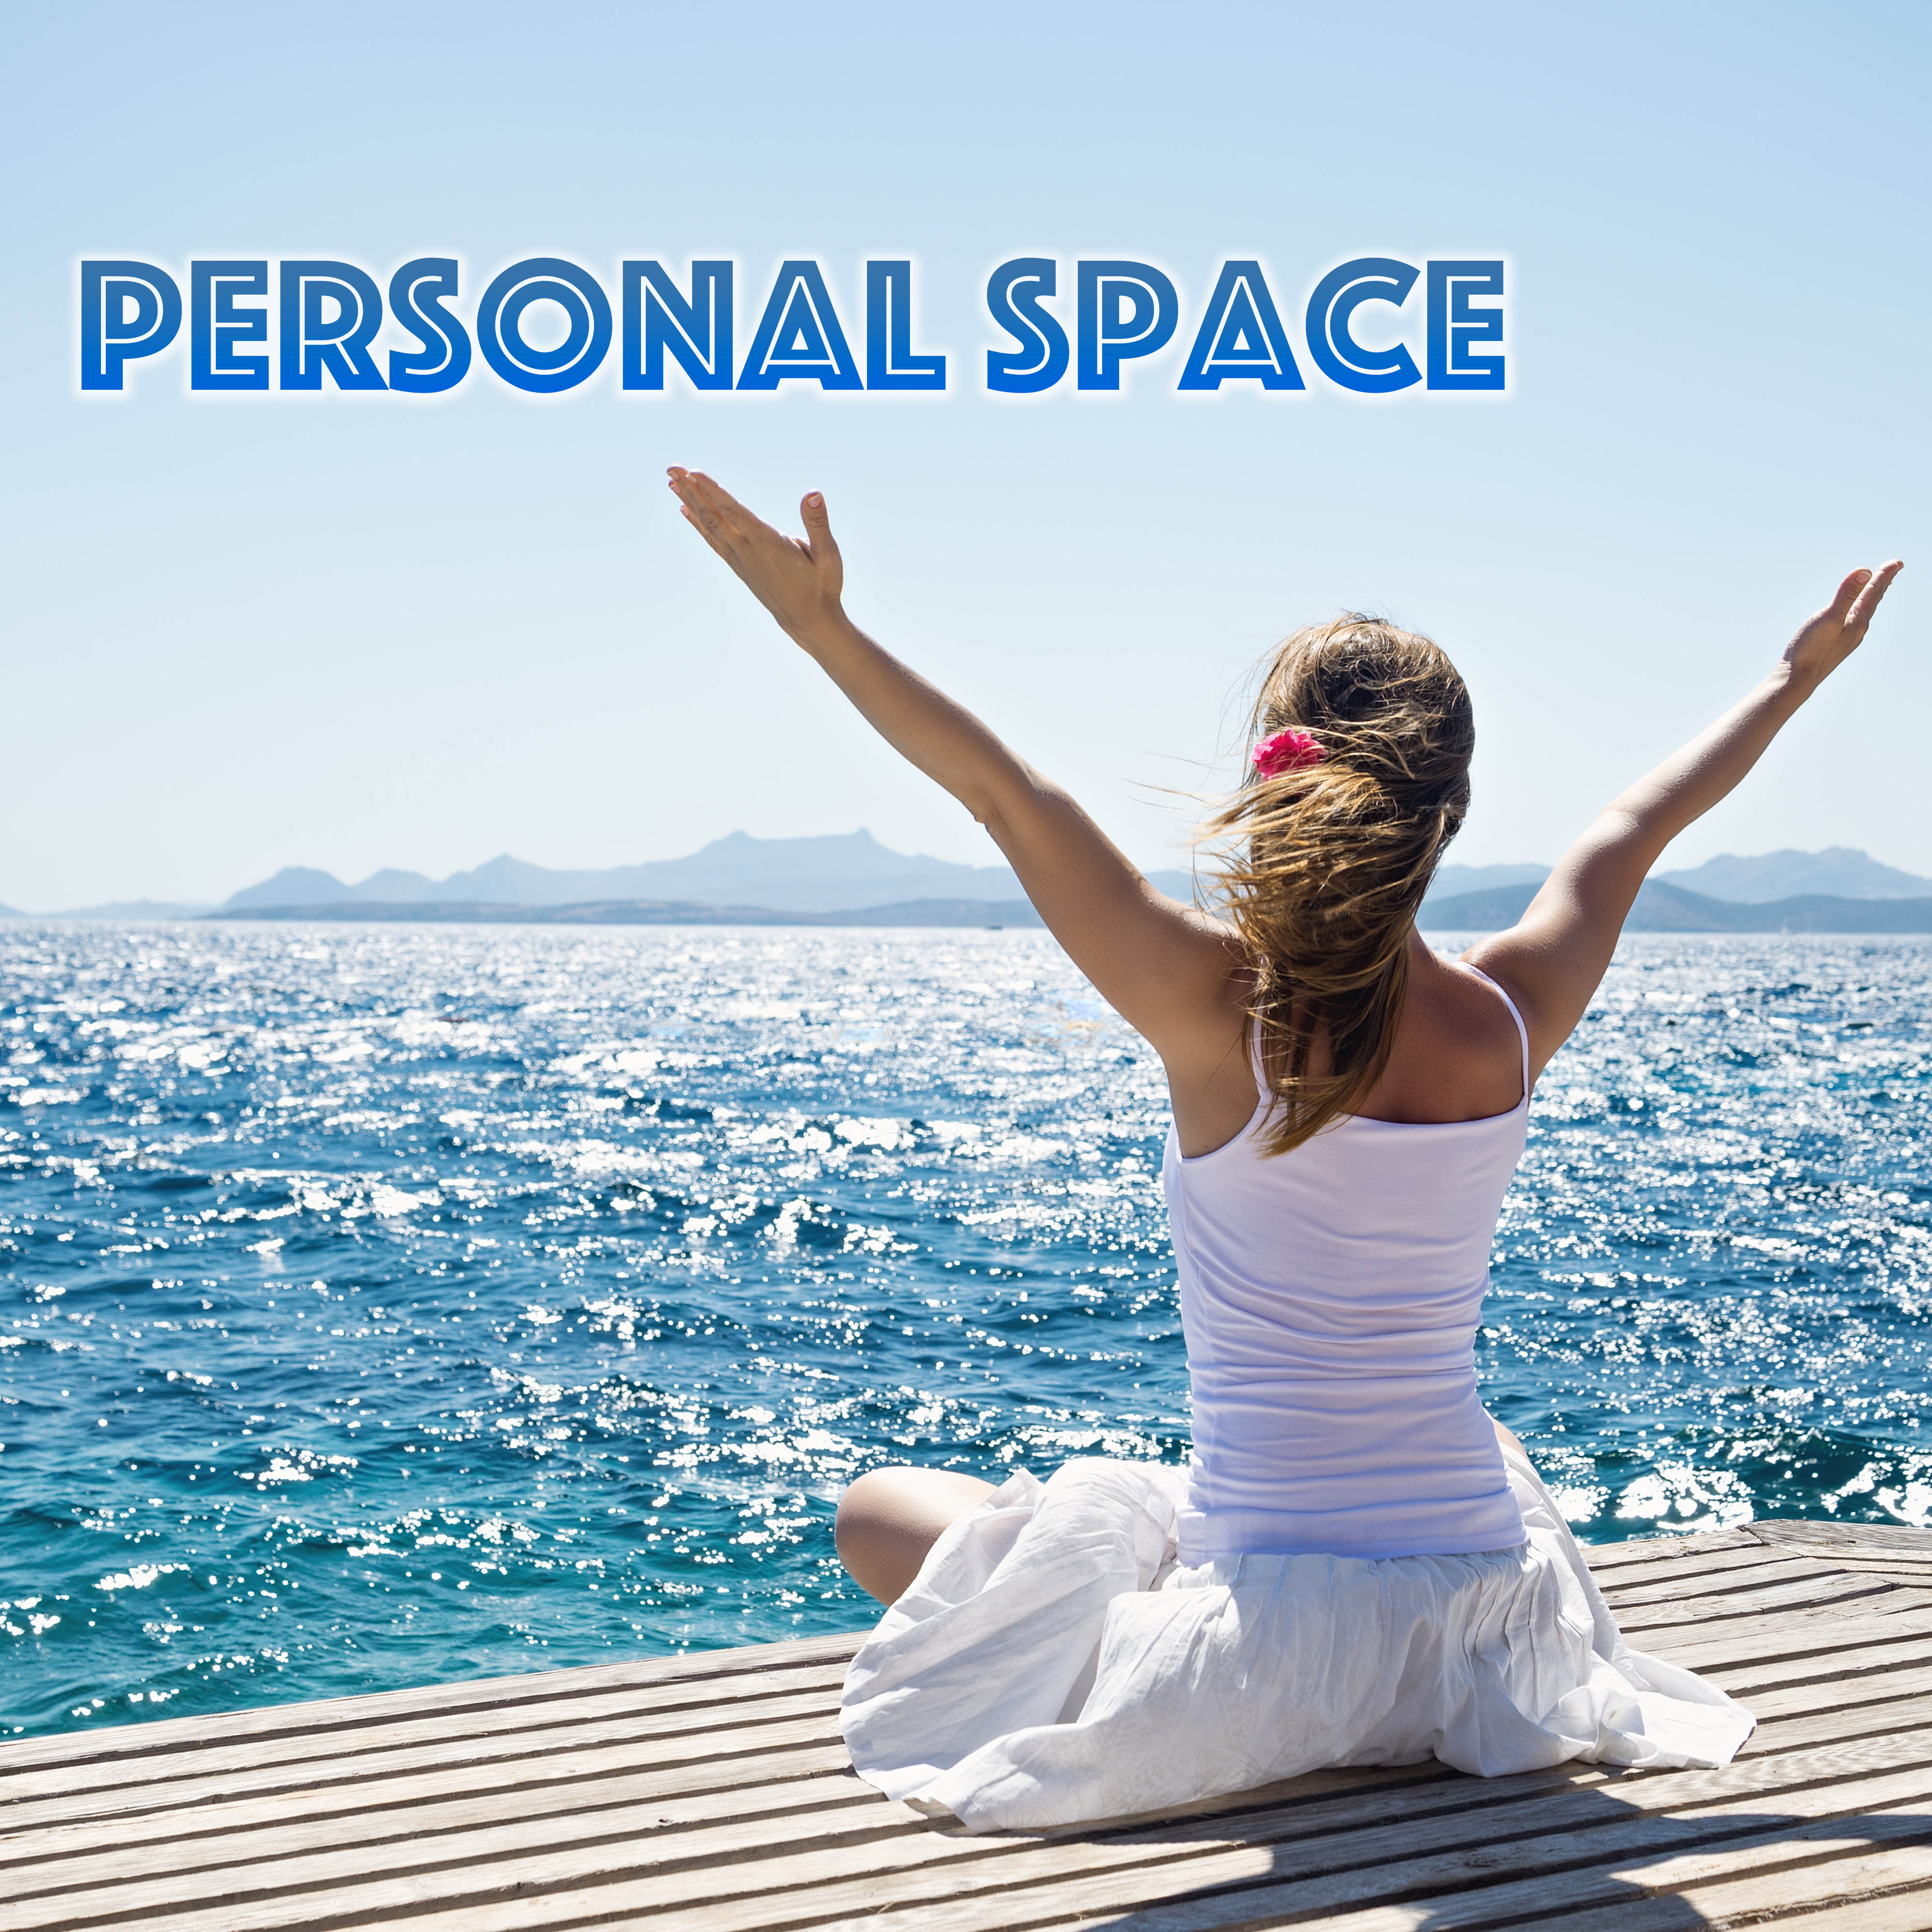 Personal Space - Meditation Songs for Spa Healing